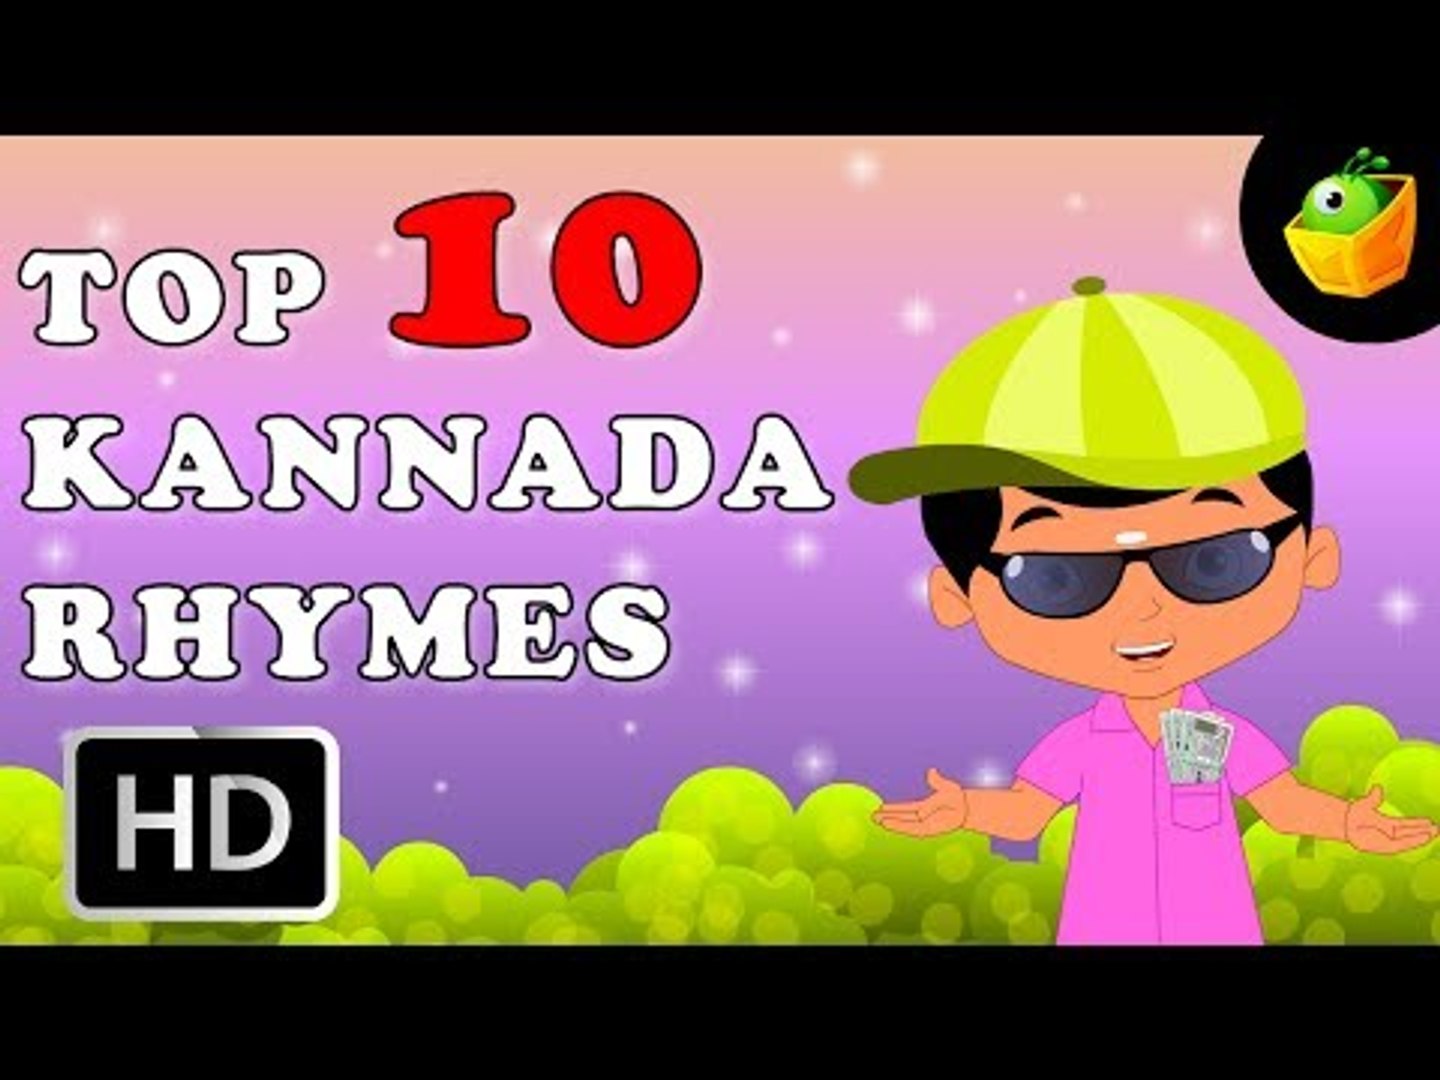 Top 20 Hit Kannada Rhymes   20 Mins   Best Collection Of Cartoon/Animated  Songs For Kids